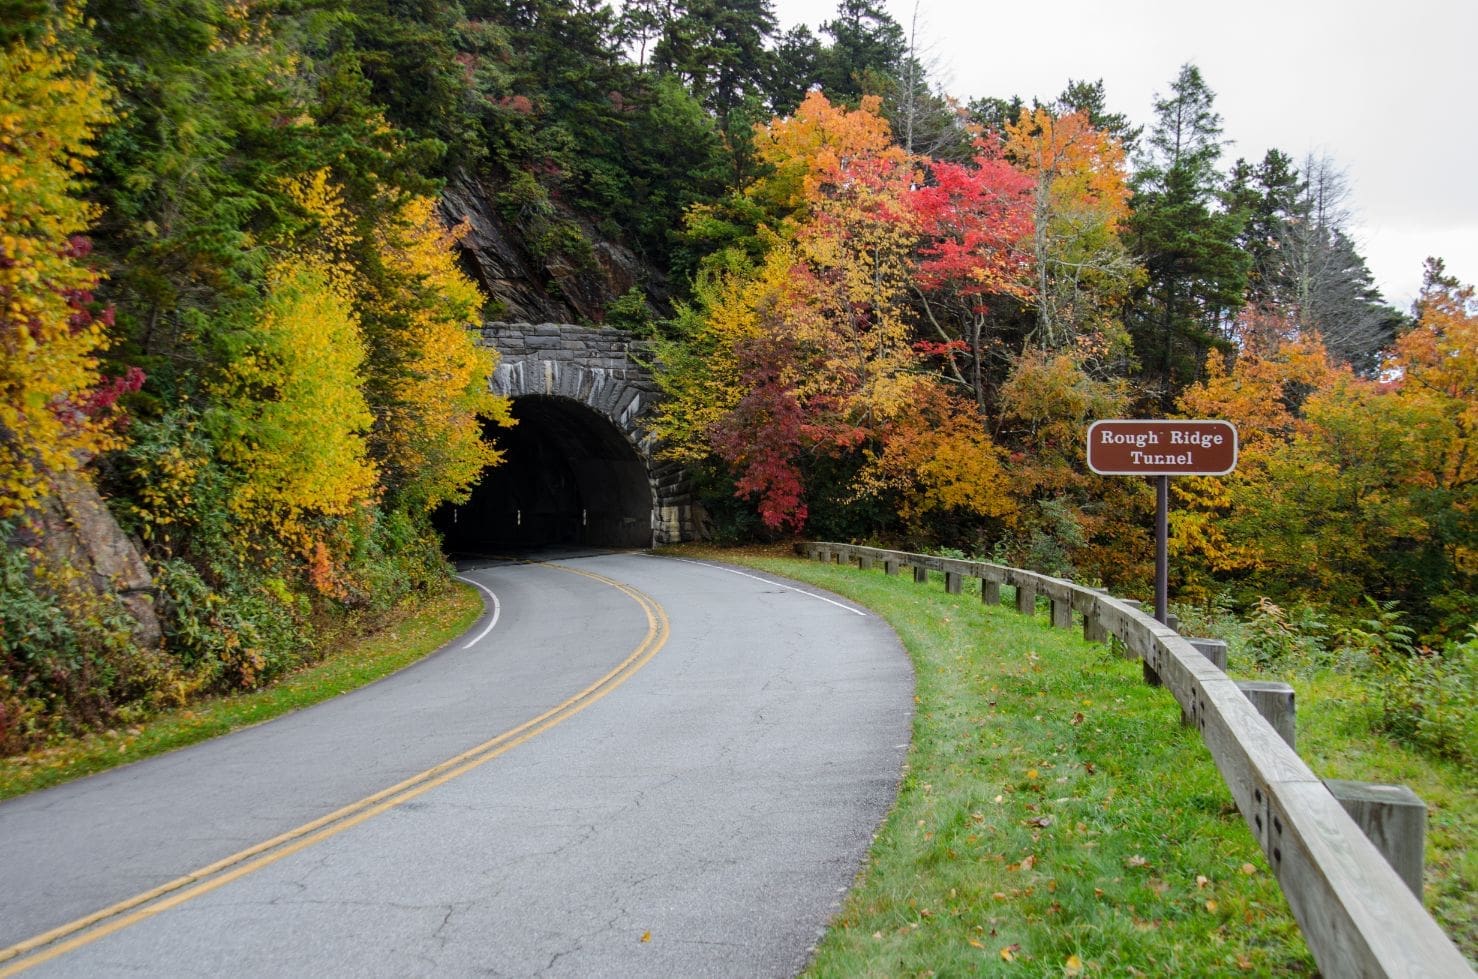 Blue Ridge Parkway Scenic Drive Self-Guided Tour